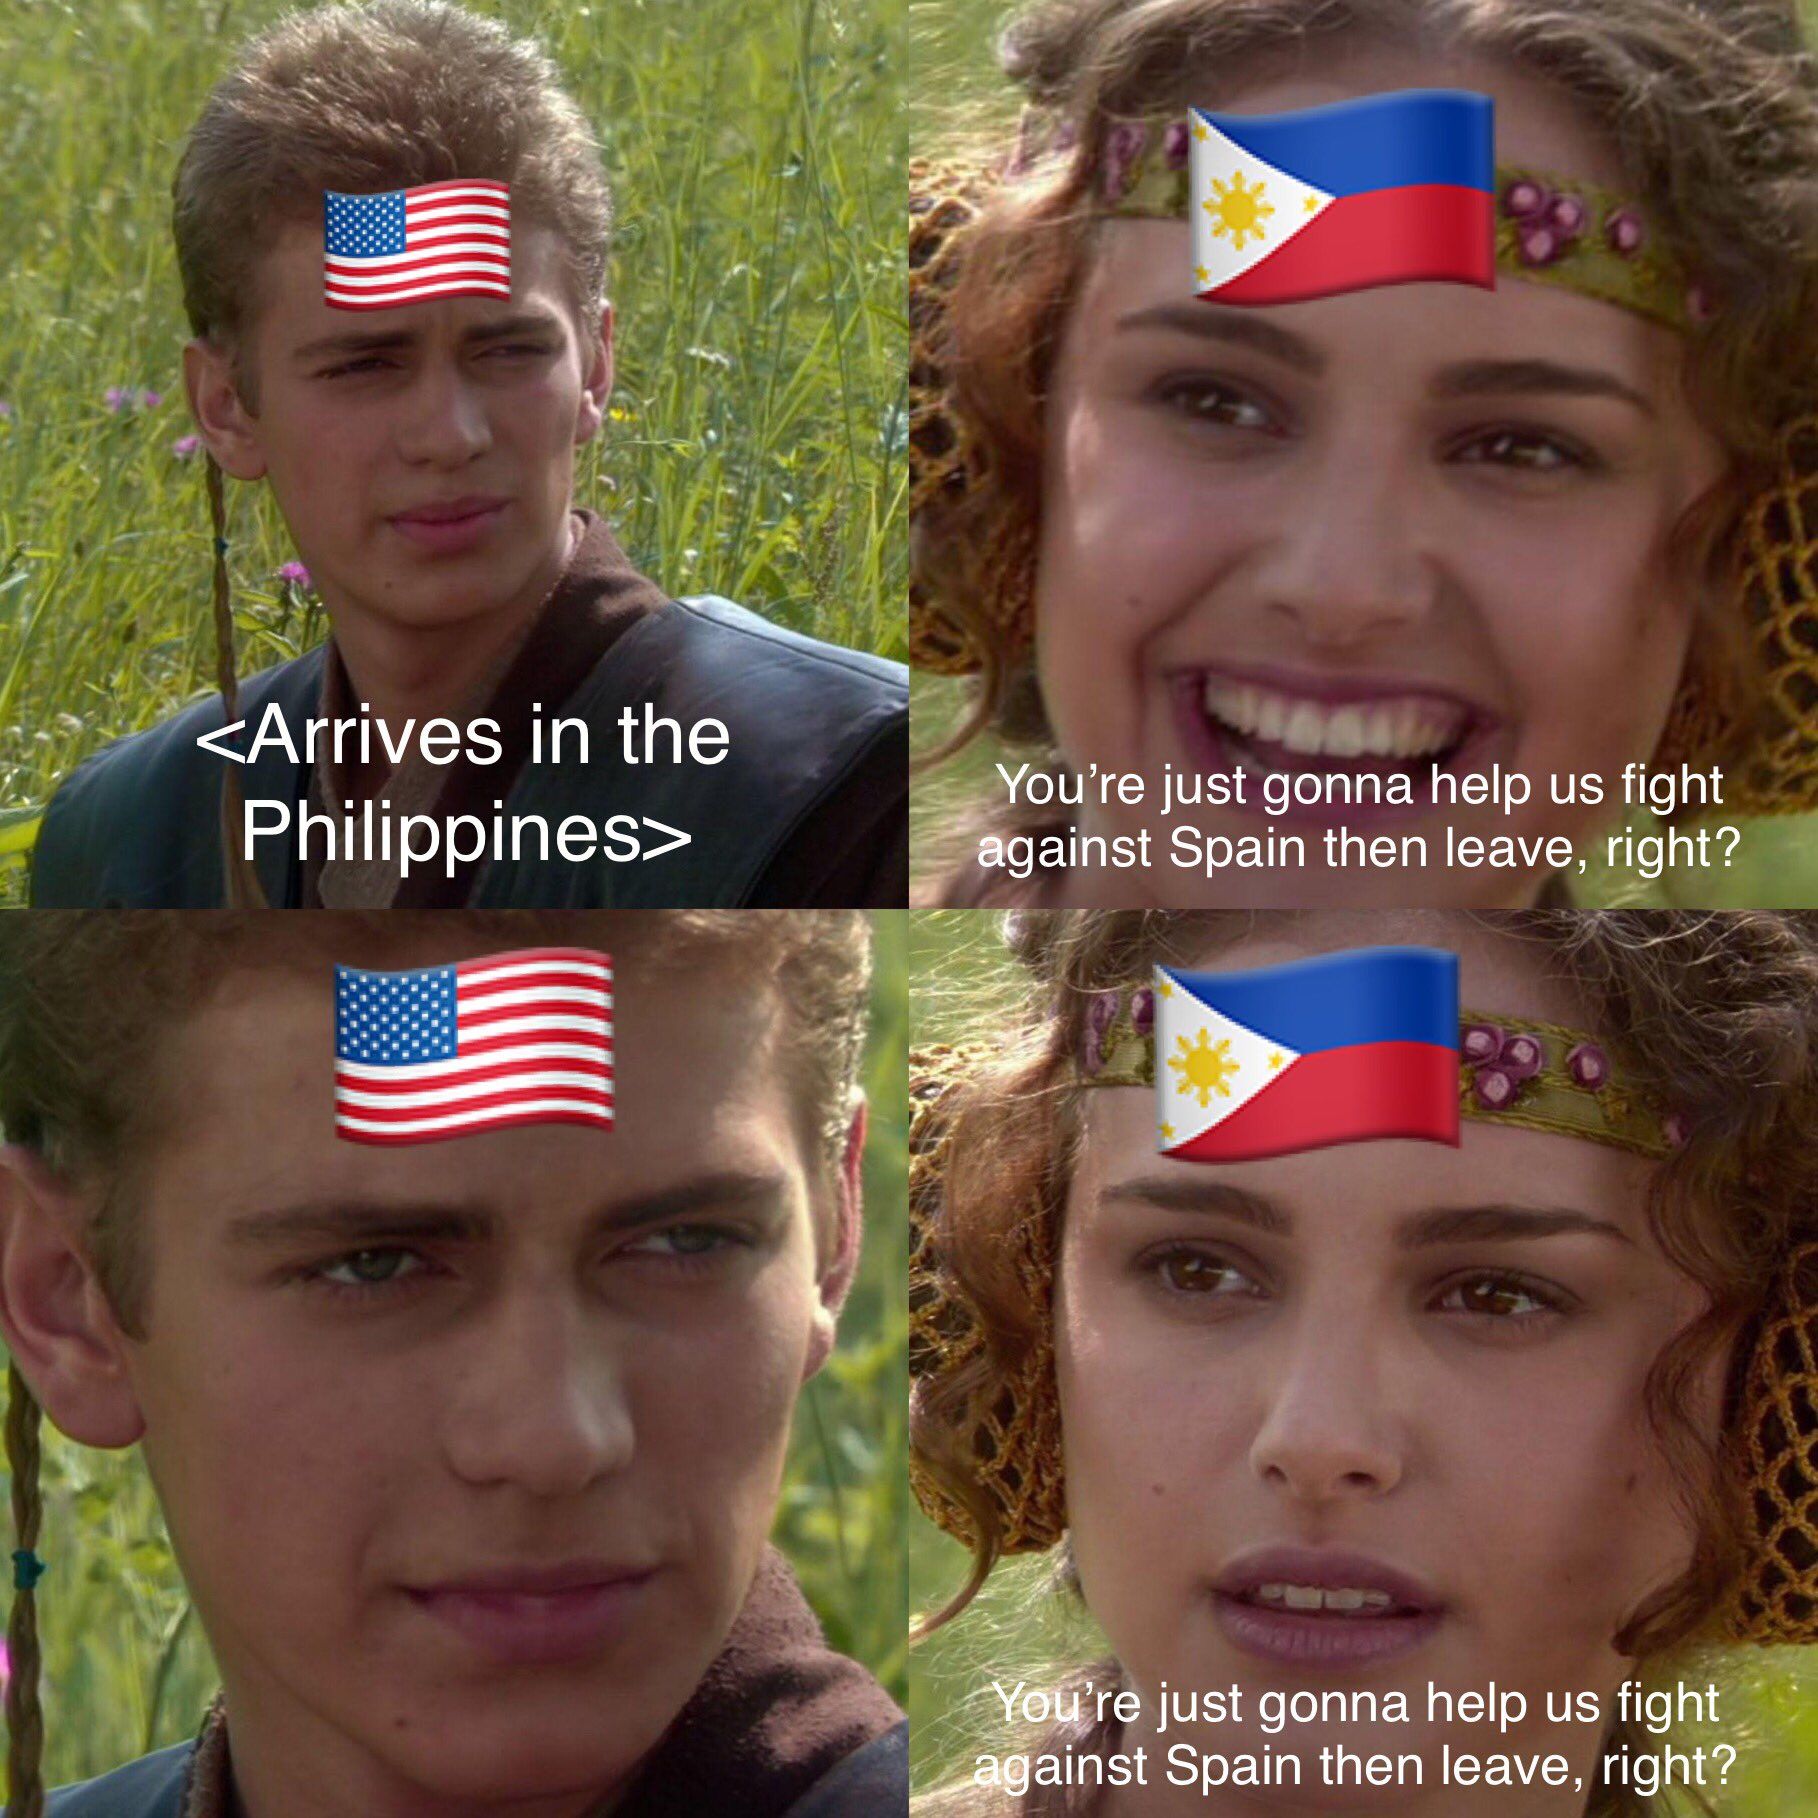 Happy Independence Day to the Philippines!